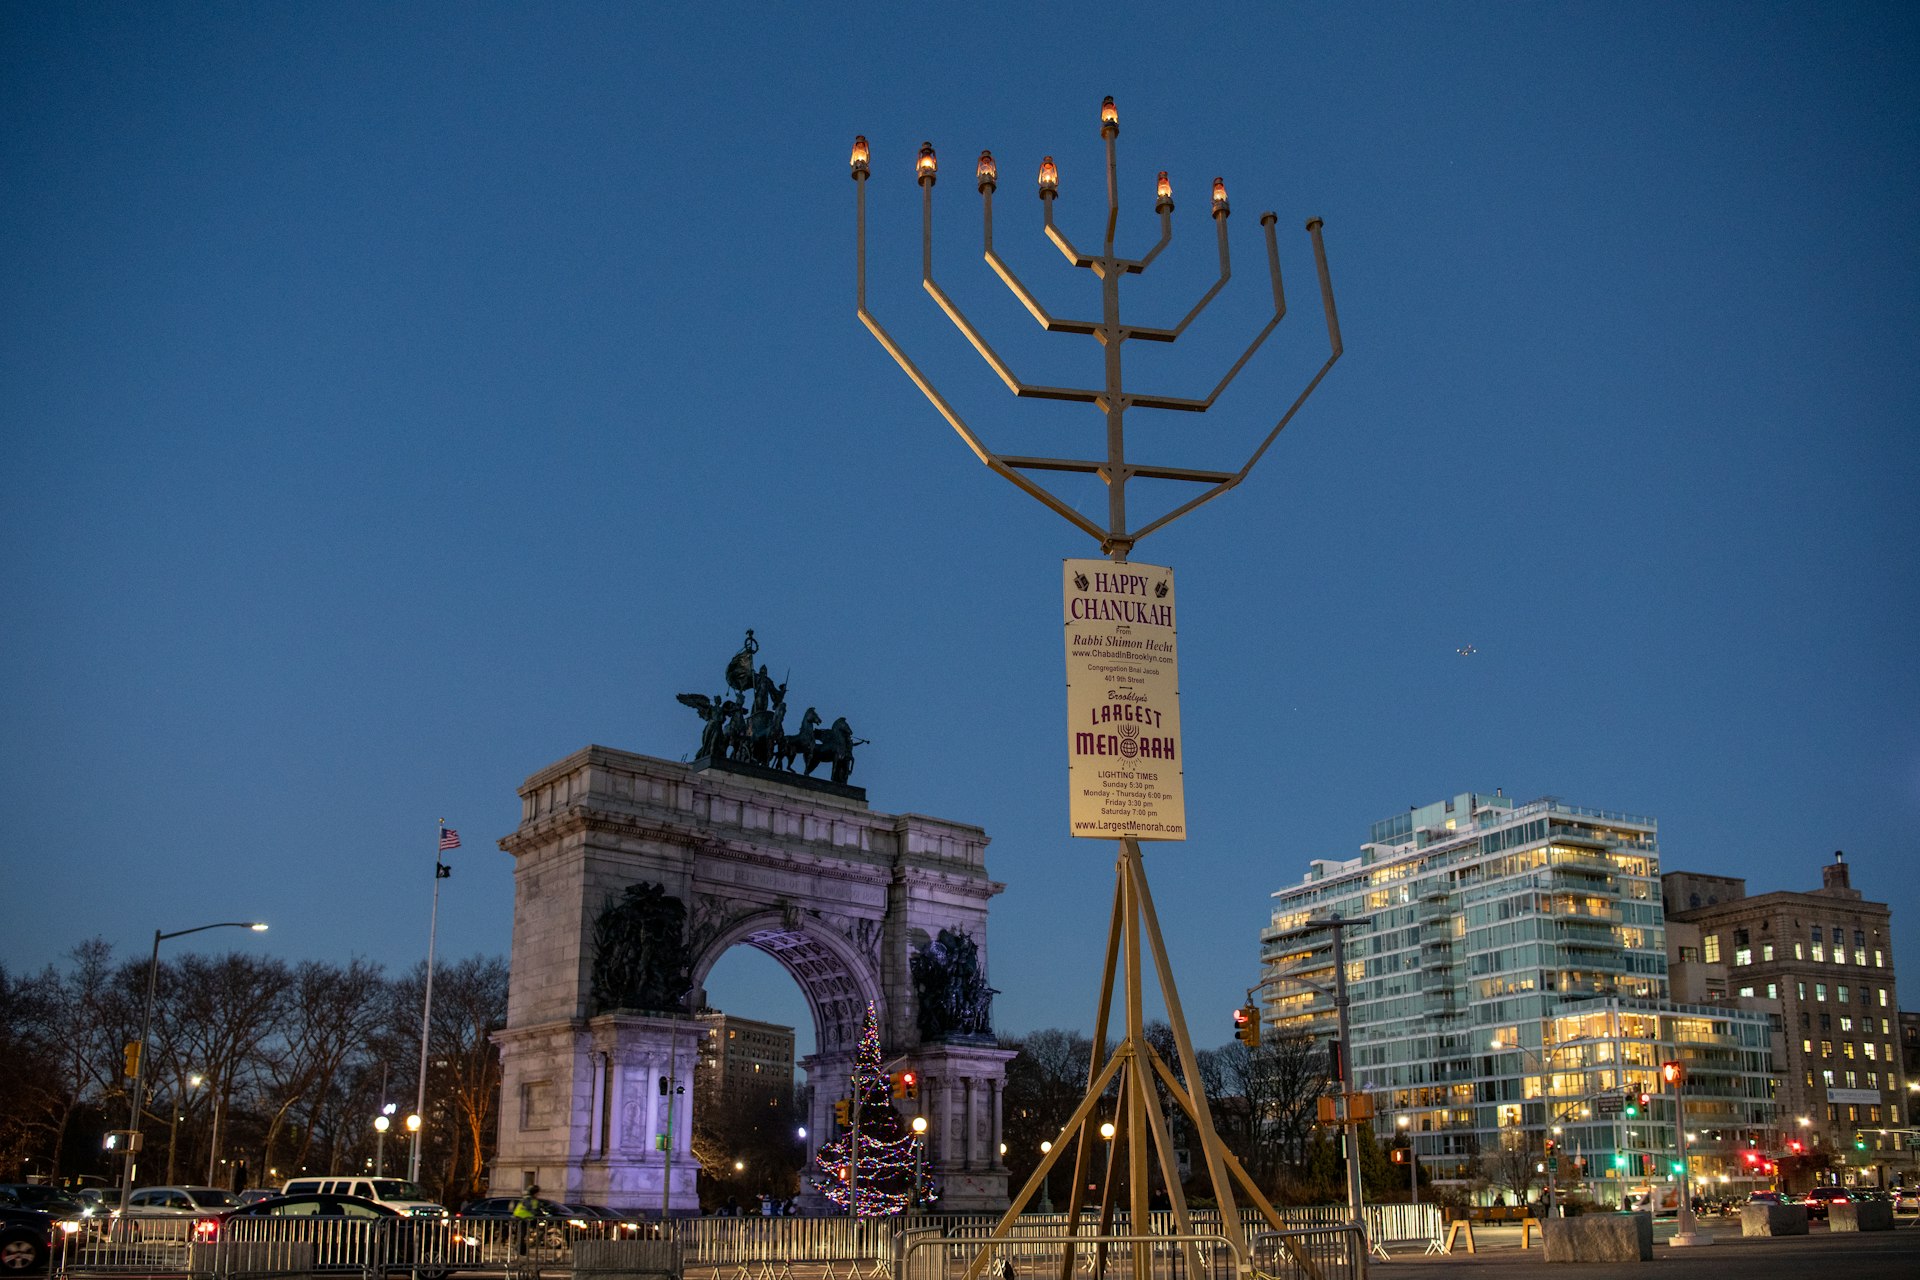 A giant menorah at dusk, towering over Brooklyn's Grand Army Plaza with the arch in the background